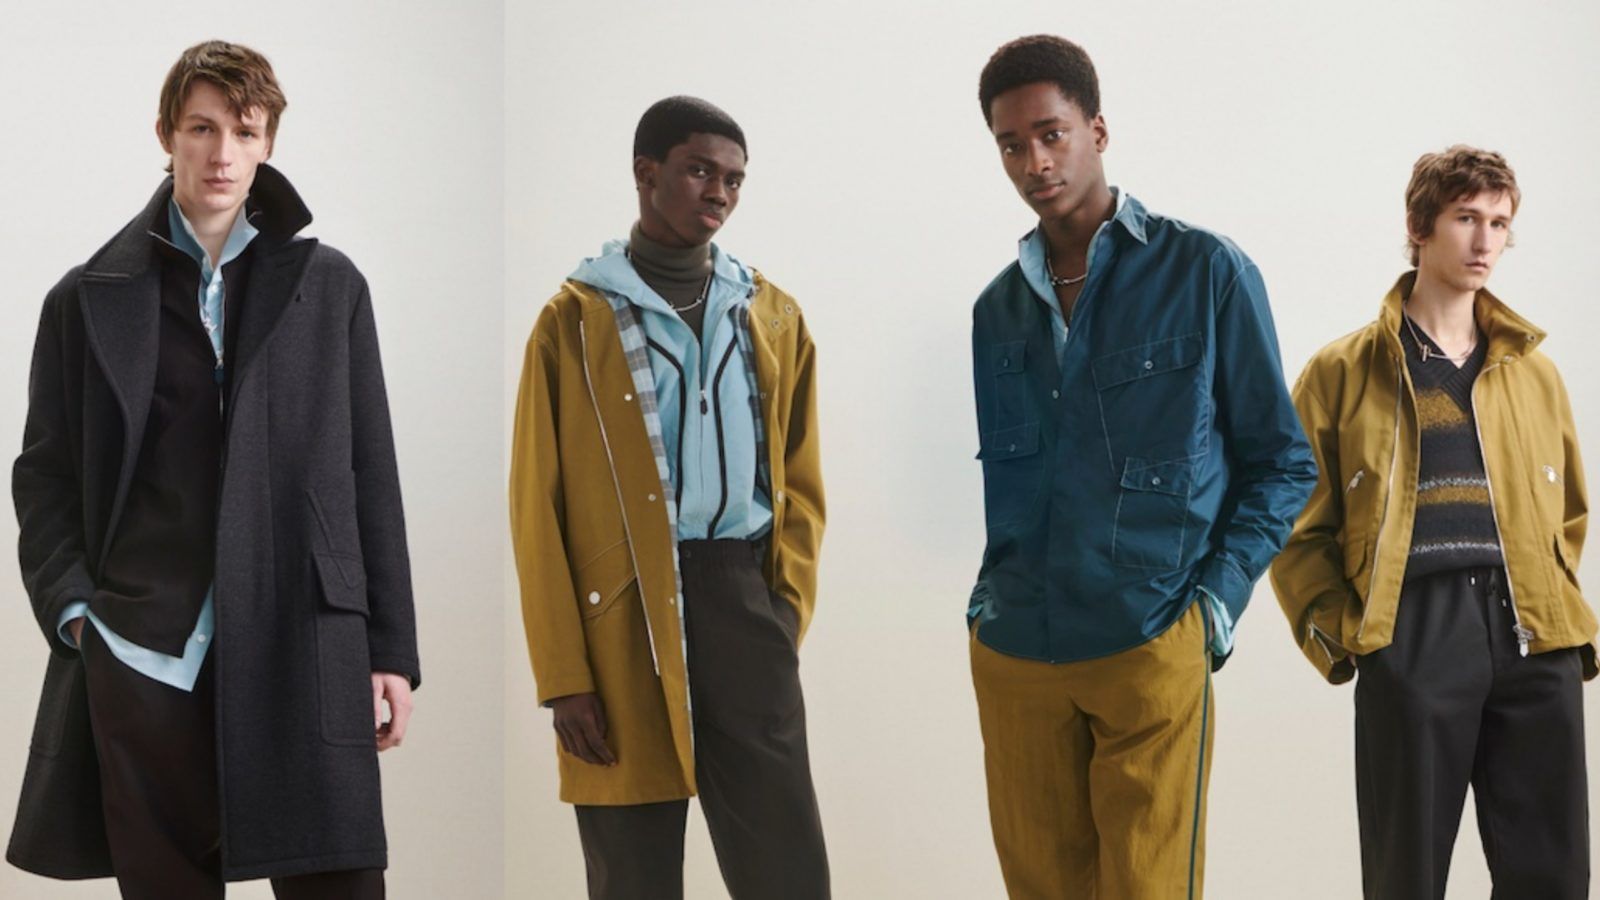 Hermes Fall/Winter 2019 Menswear Collection